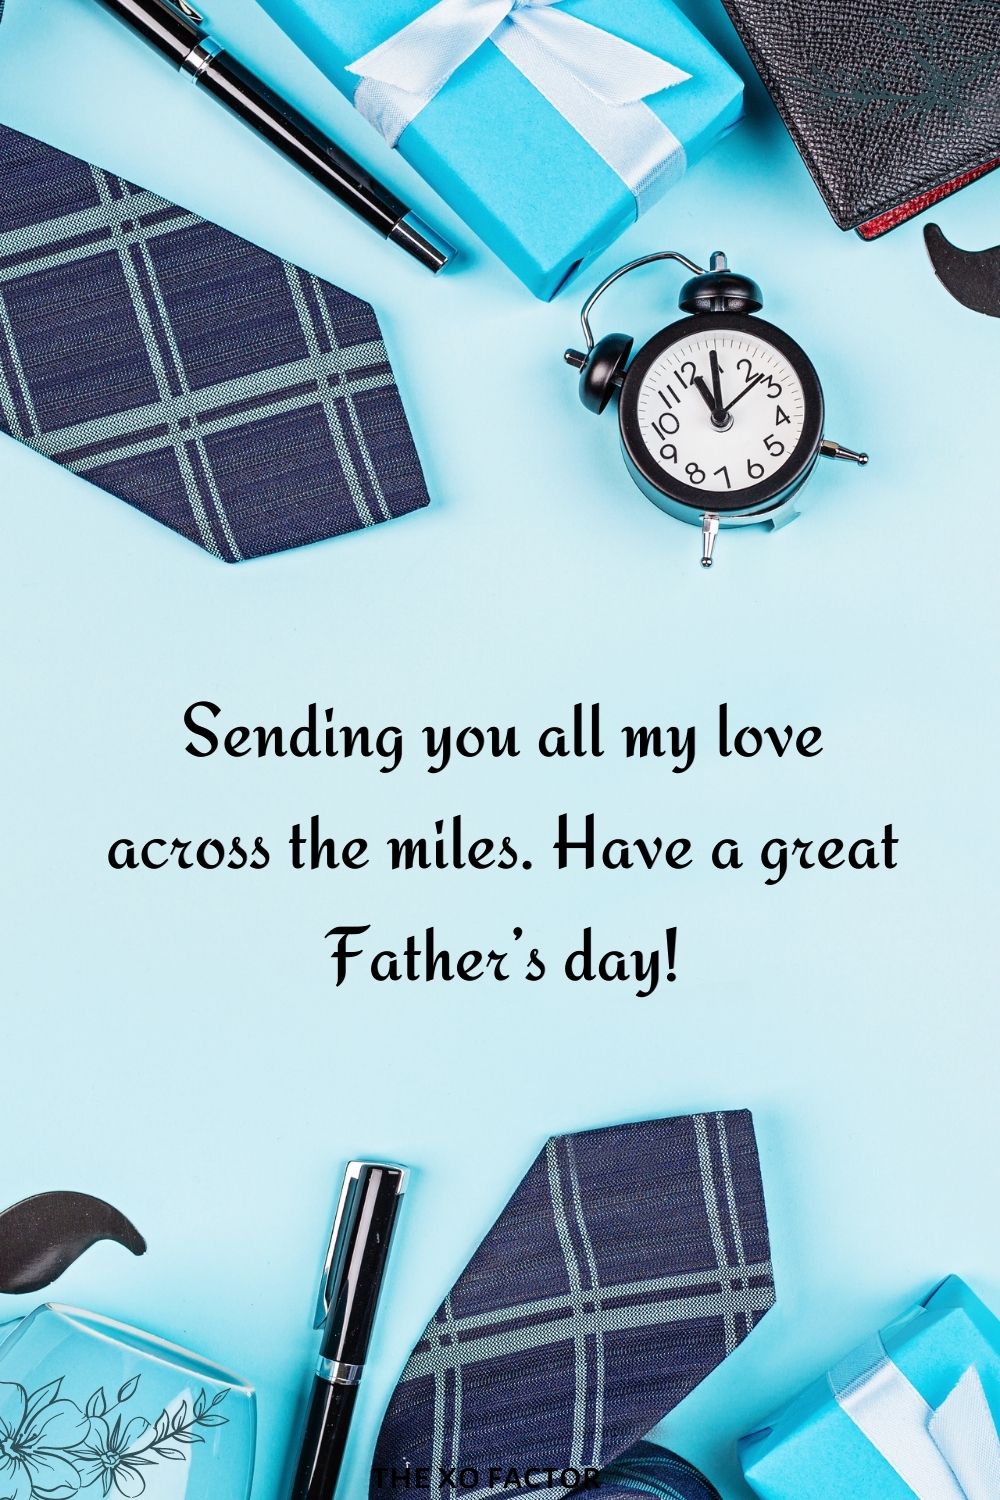 Sending you all my love across the miles. Have a great Father’s day!